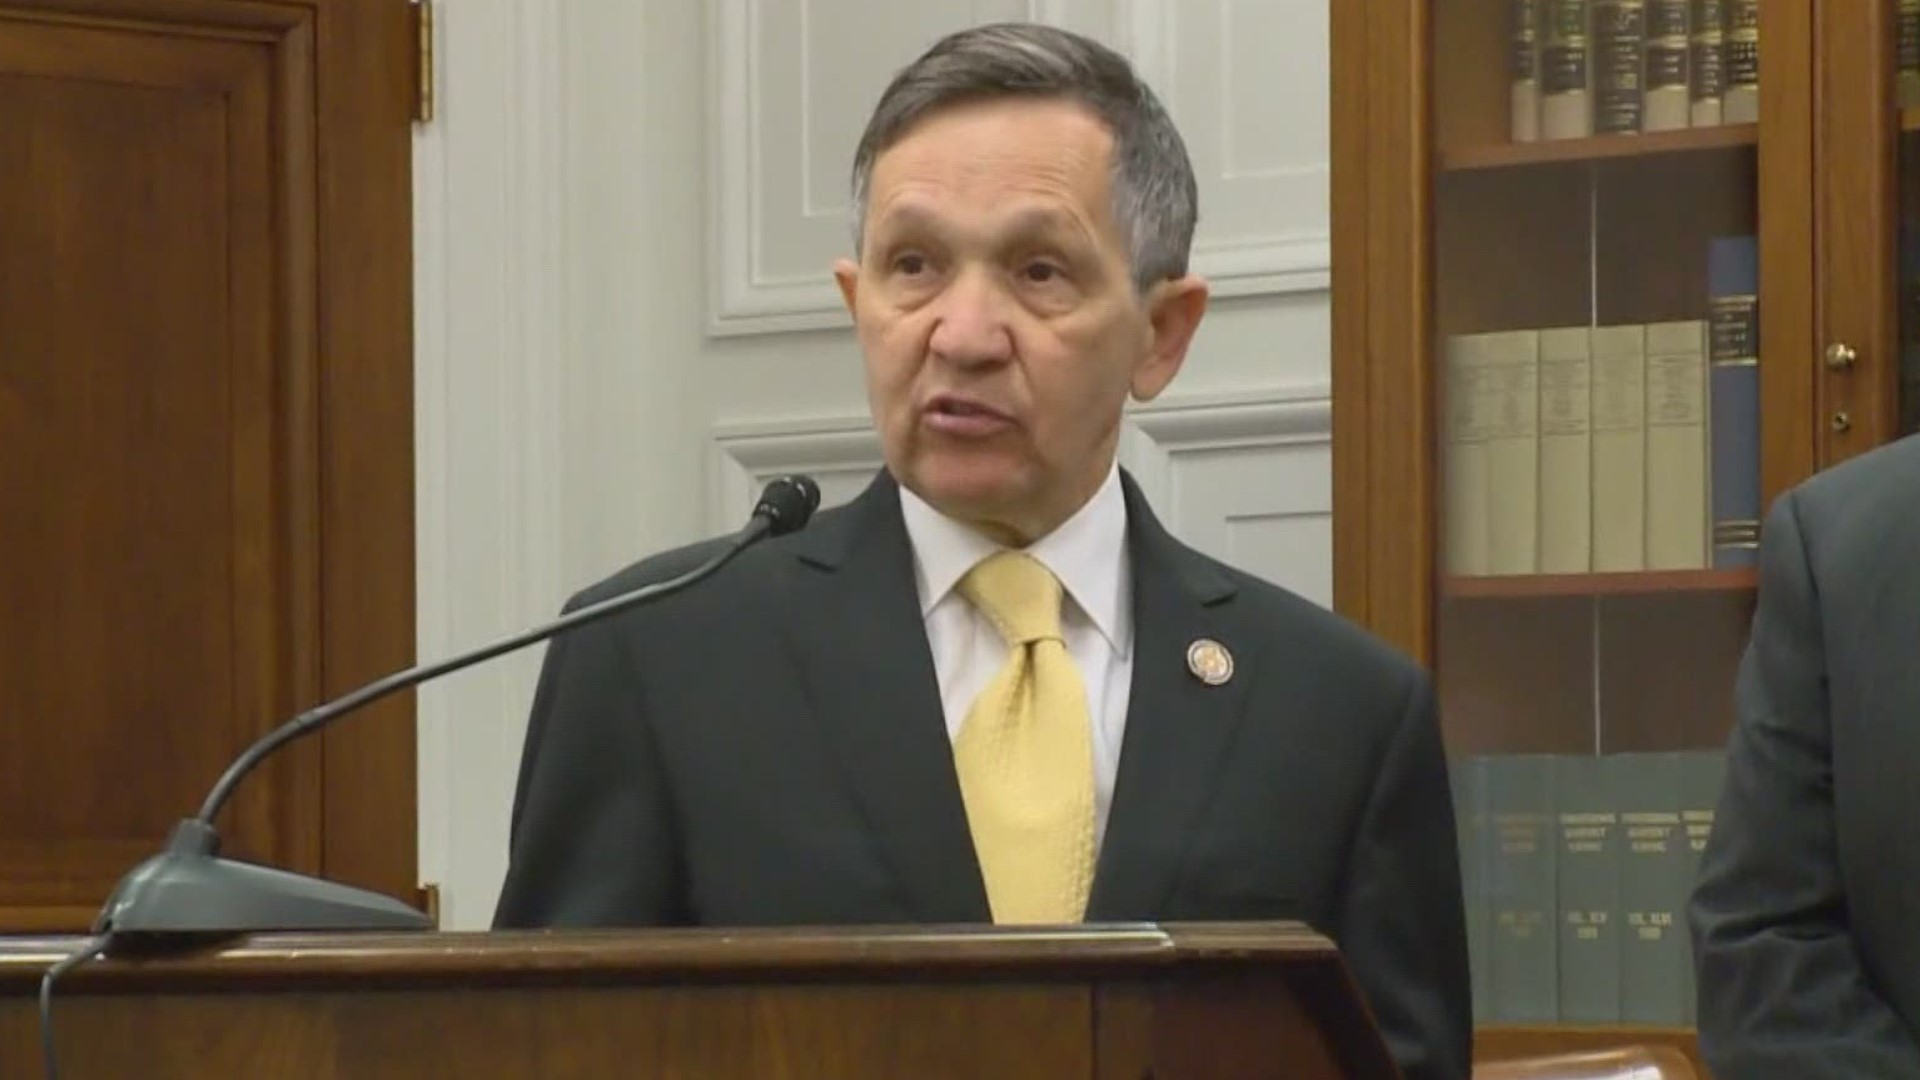 Dennis Kucinich is running for Cleveland mayor. This announcement comes months after Kucinich filed paperwork with the Cuyahoga County Board of Elections.